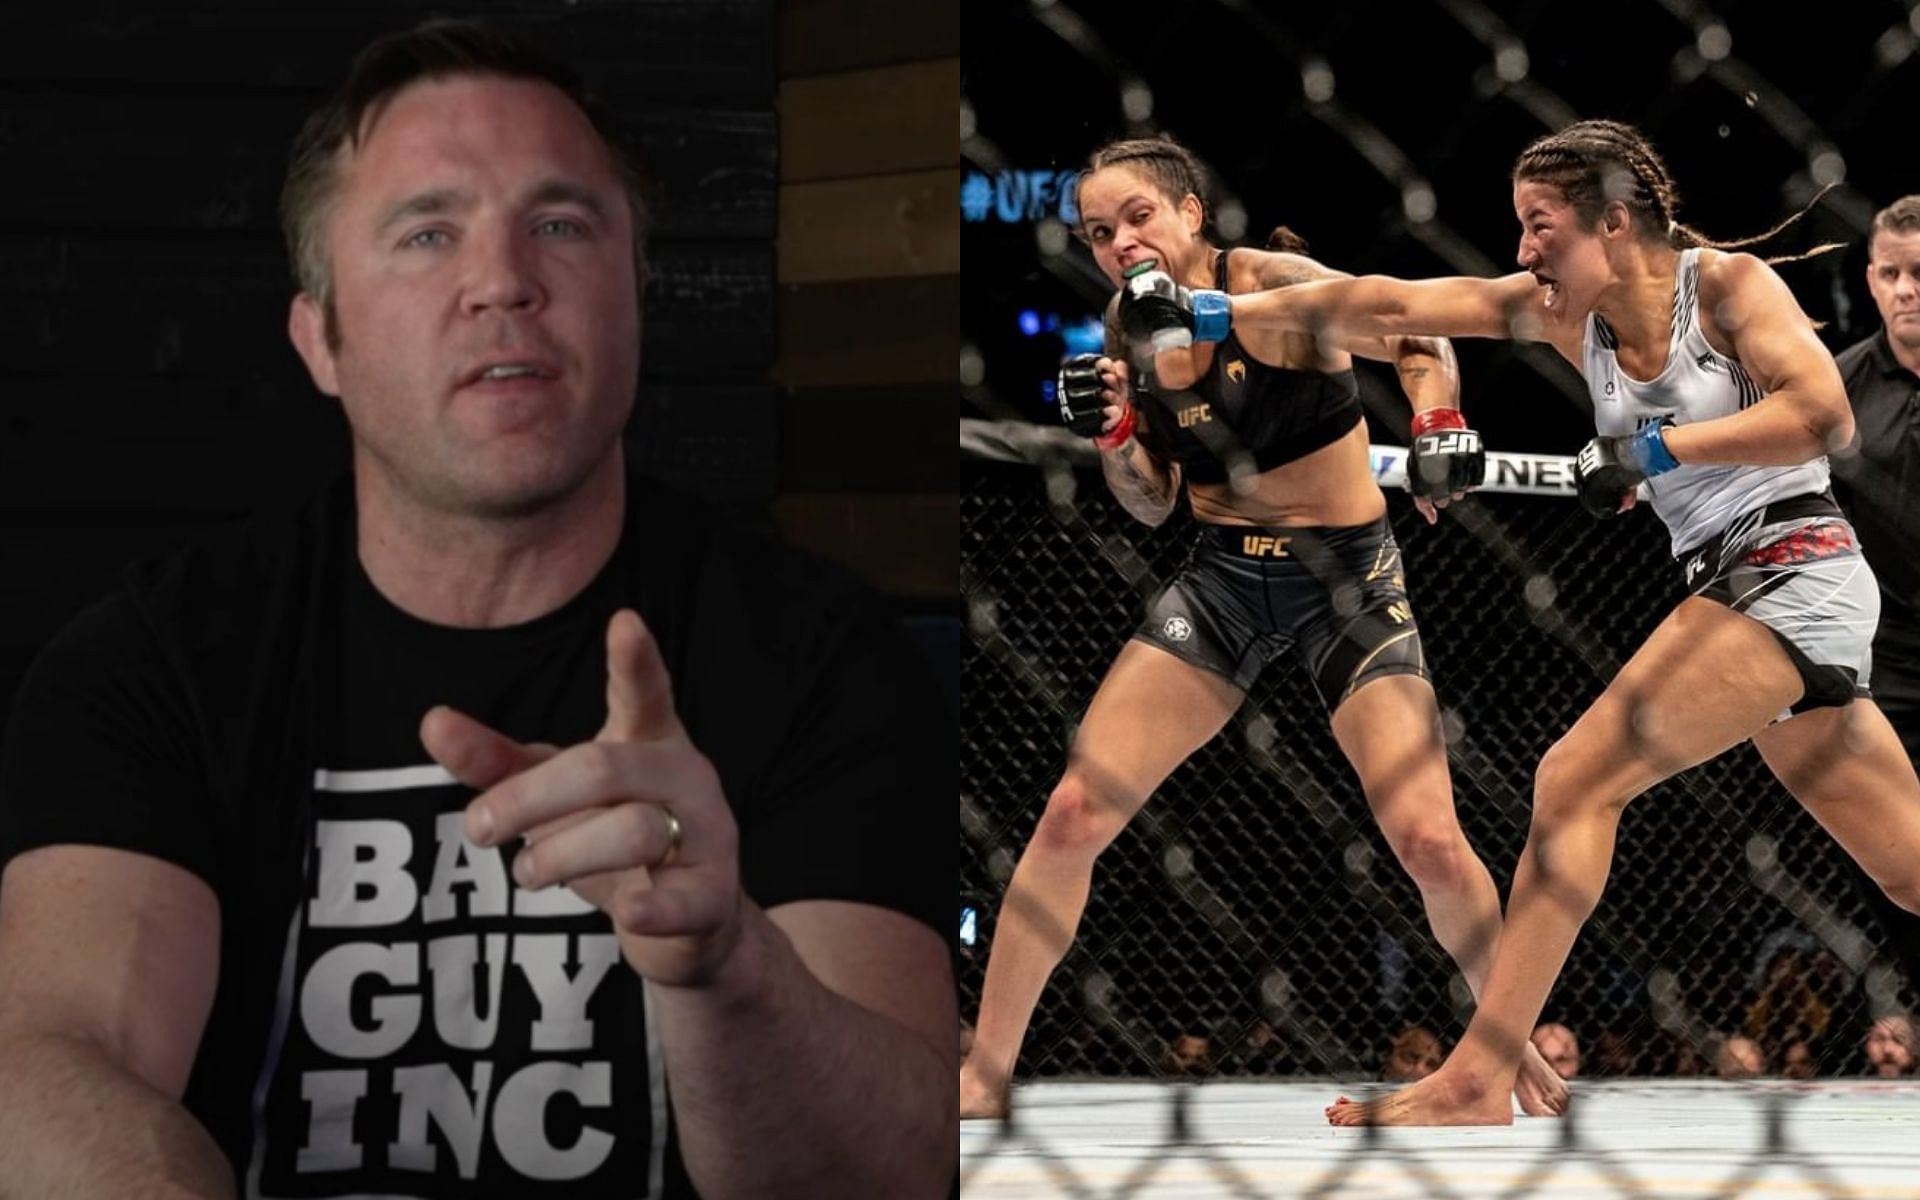 Chael Sonnen (left), Amanda Nunes and Julianna Pena (right) [Images courtesy: @sonnench and @ufc on Instagram]